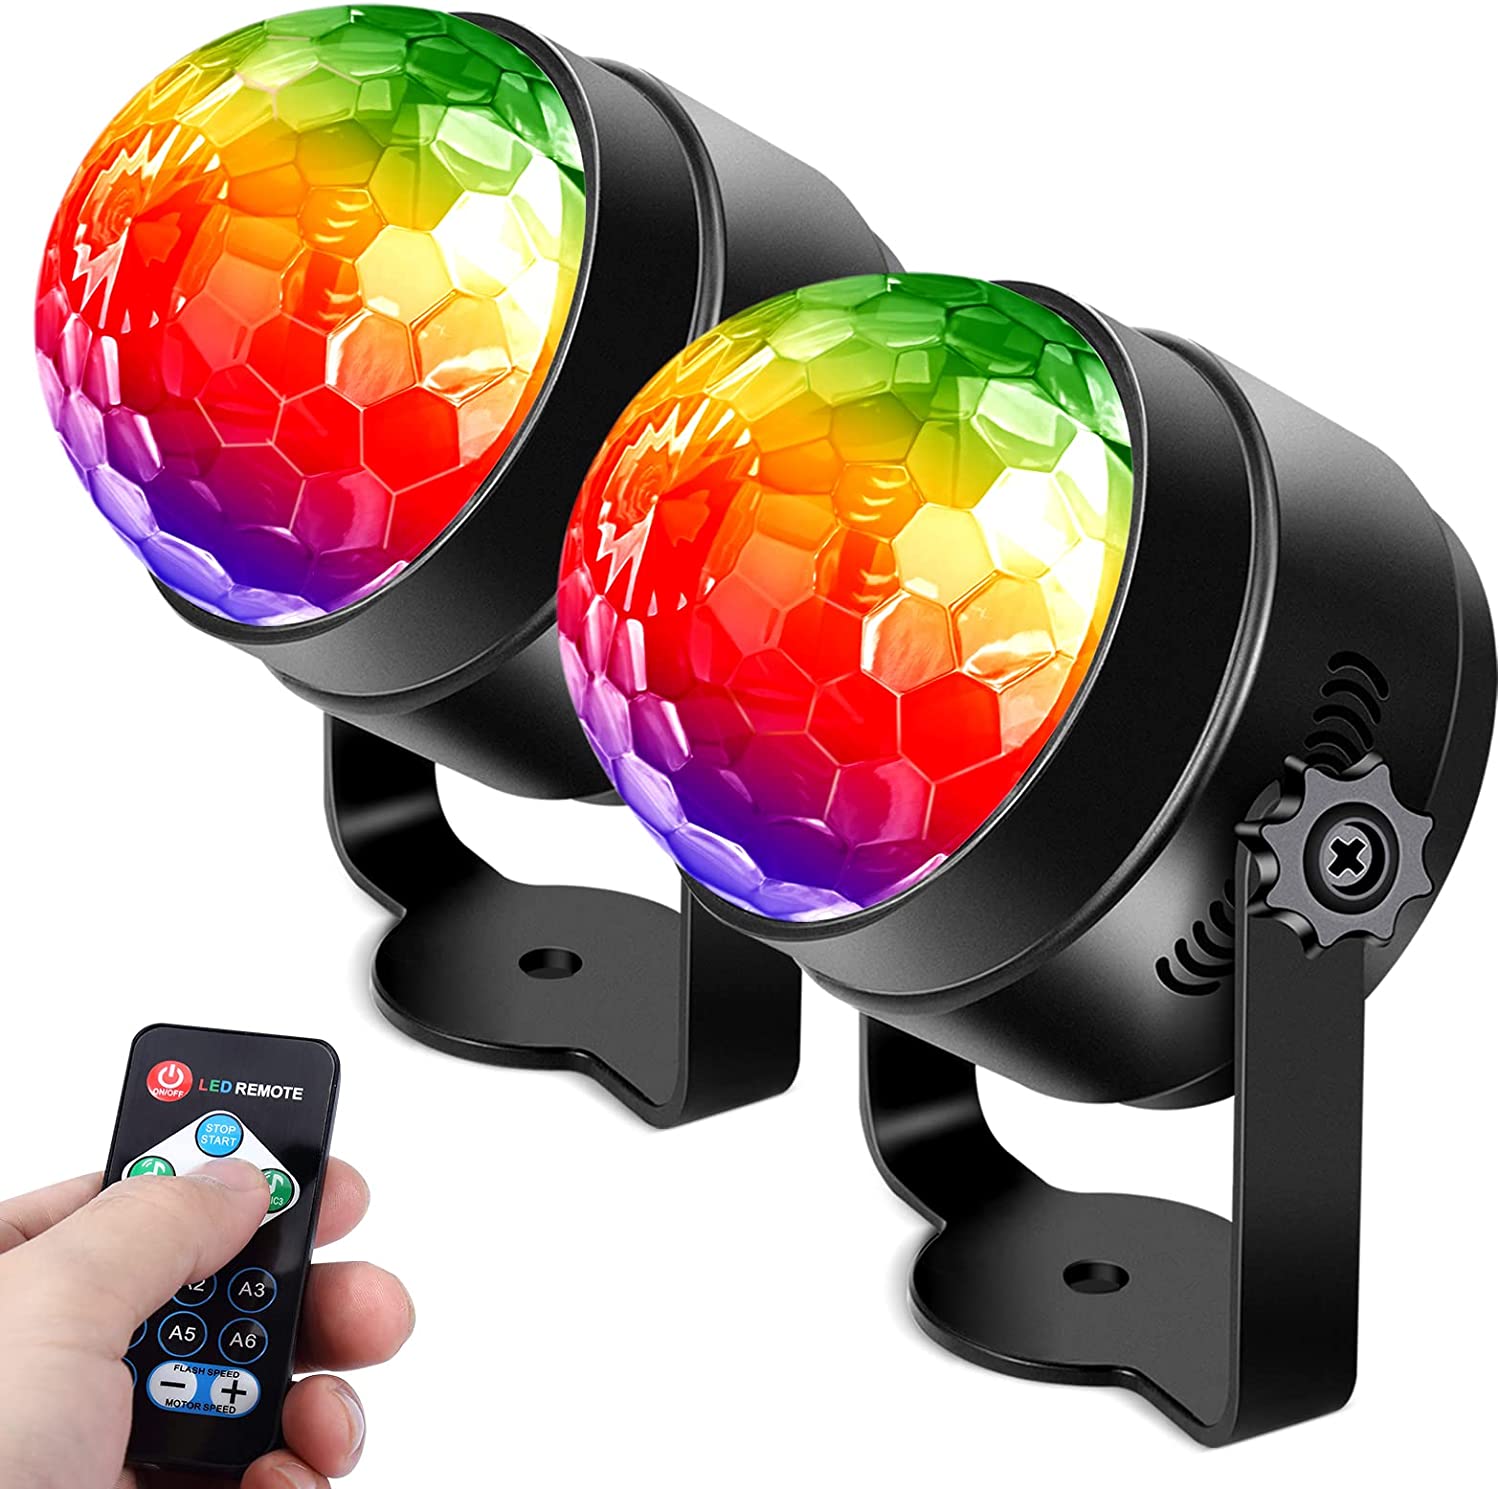 Litake Remote Controlled Party Lights, 2-Pack